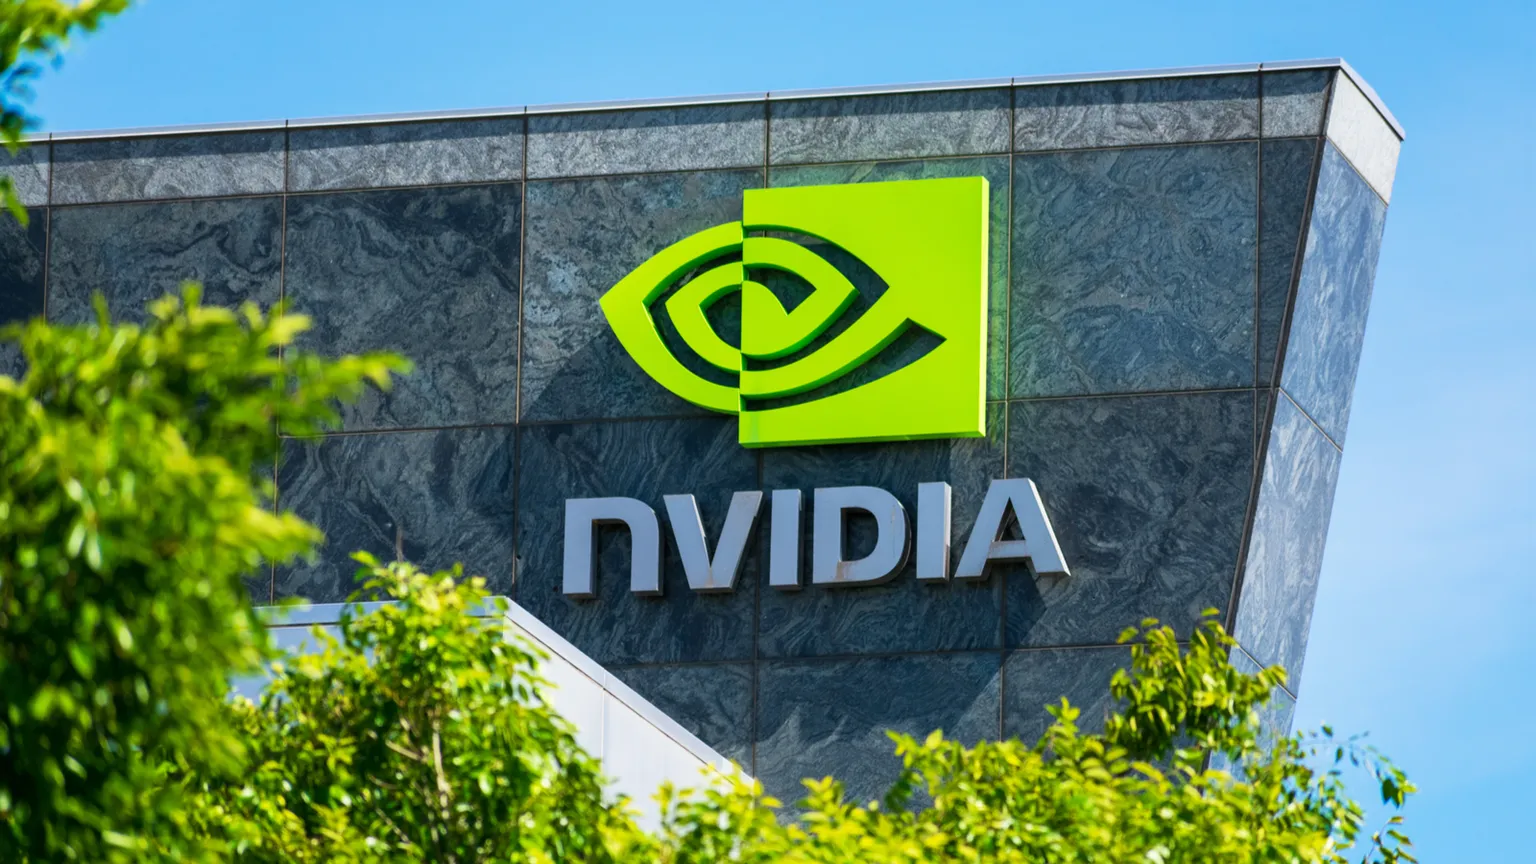 Nvidia logo on the side of a buildling.